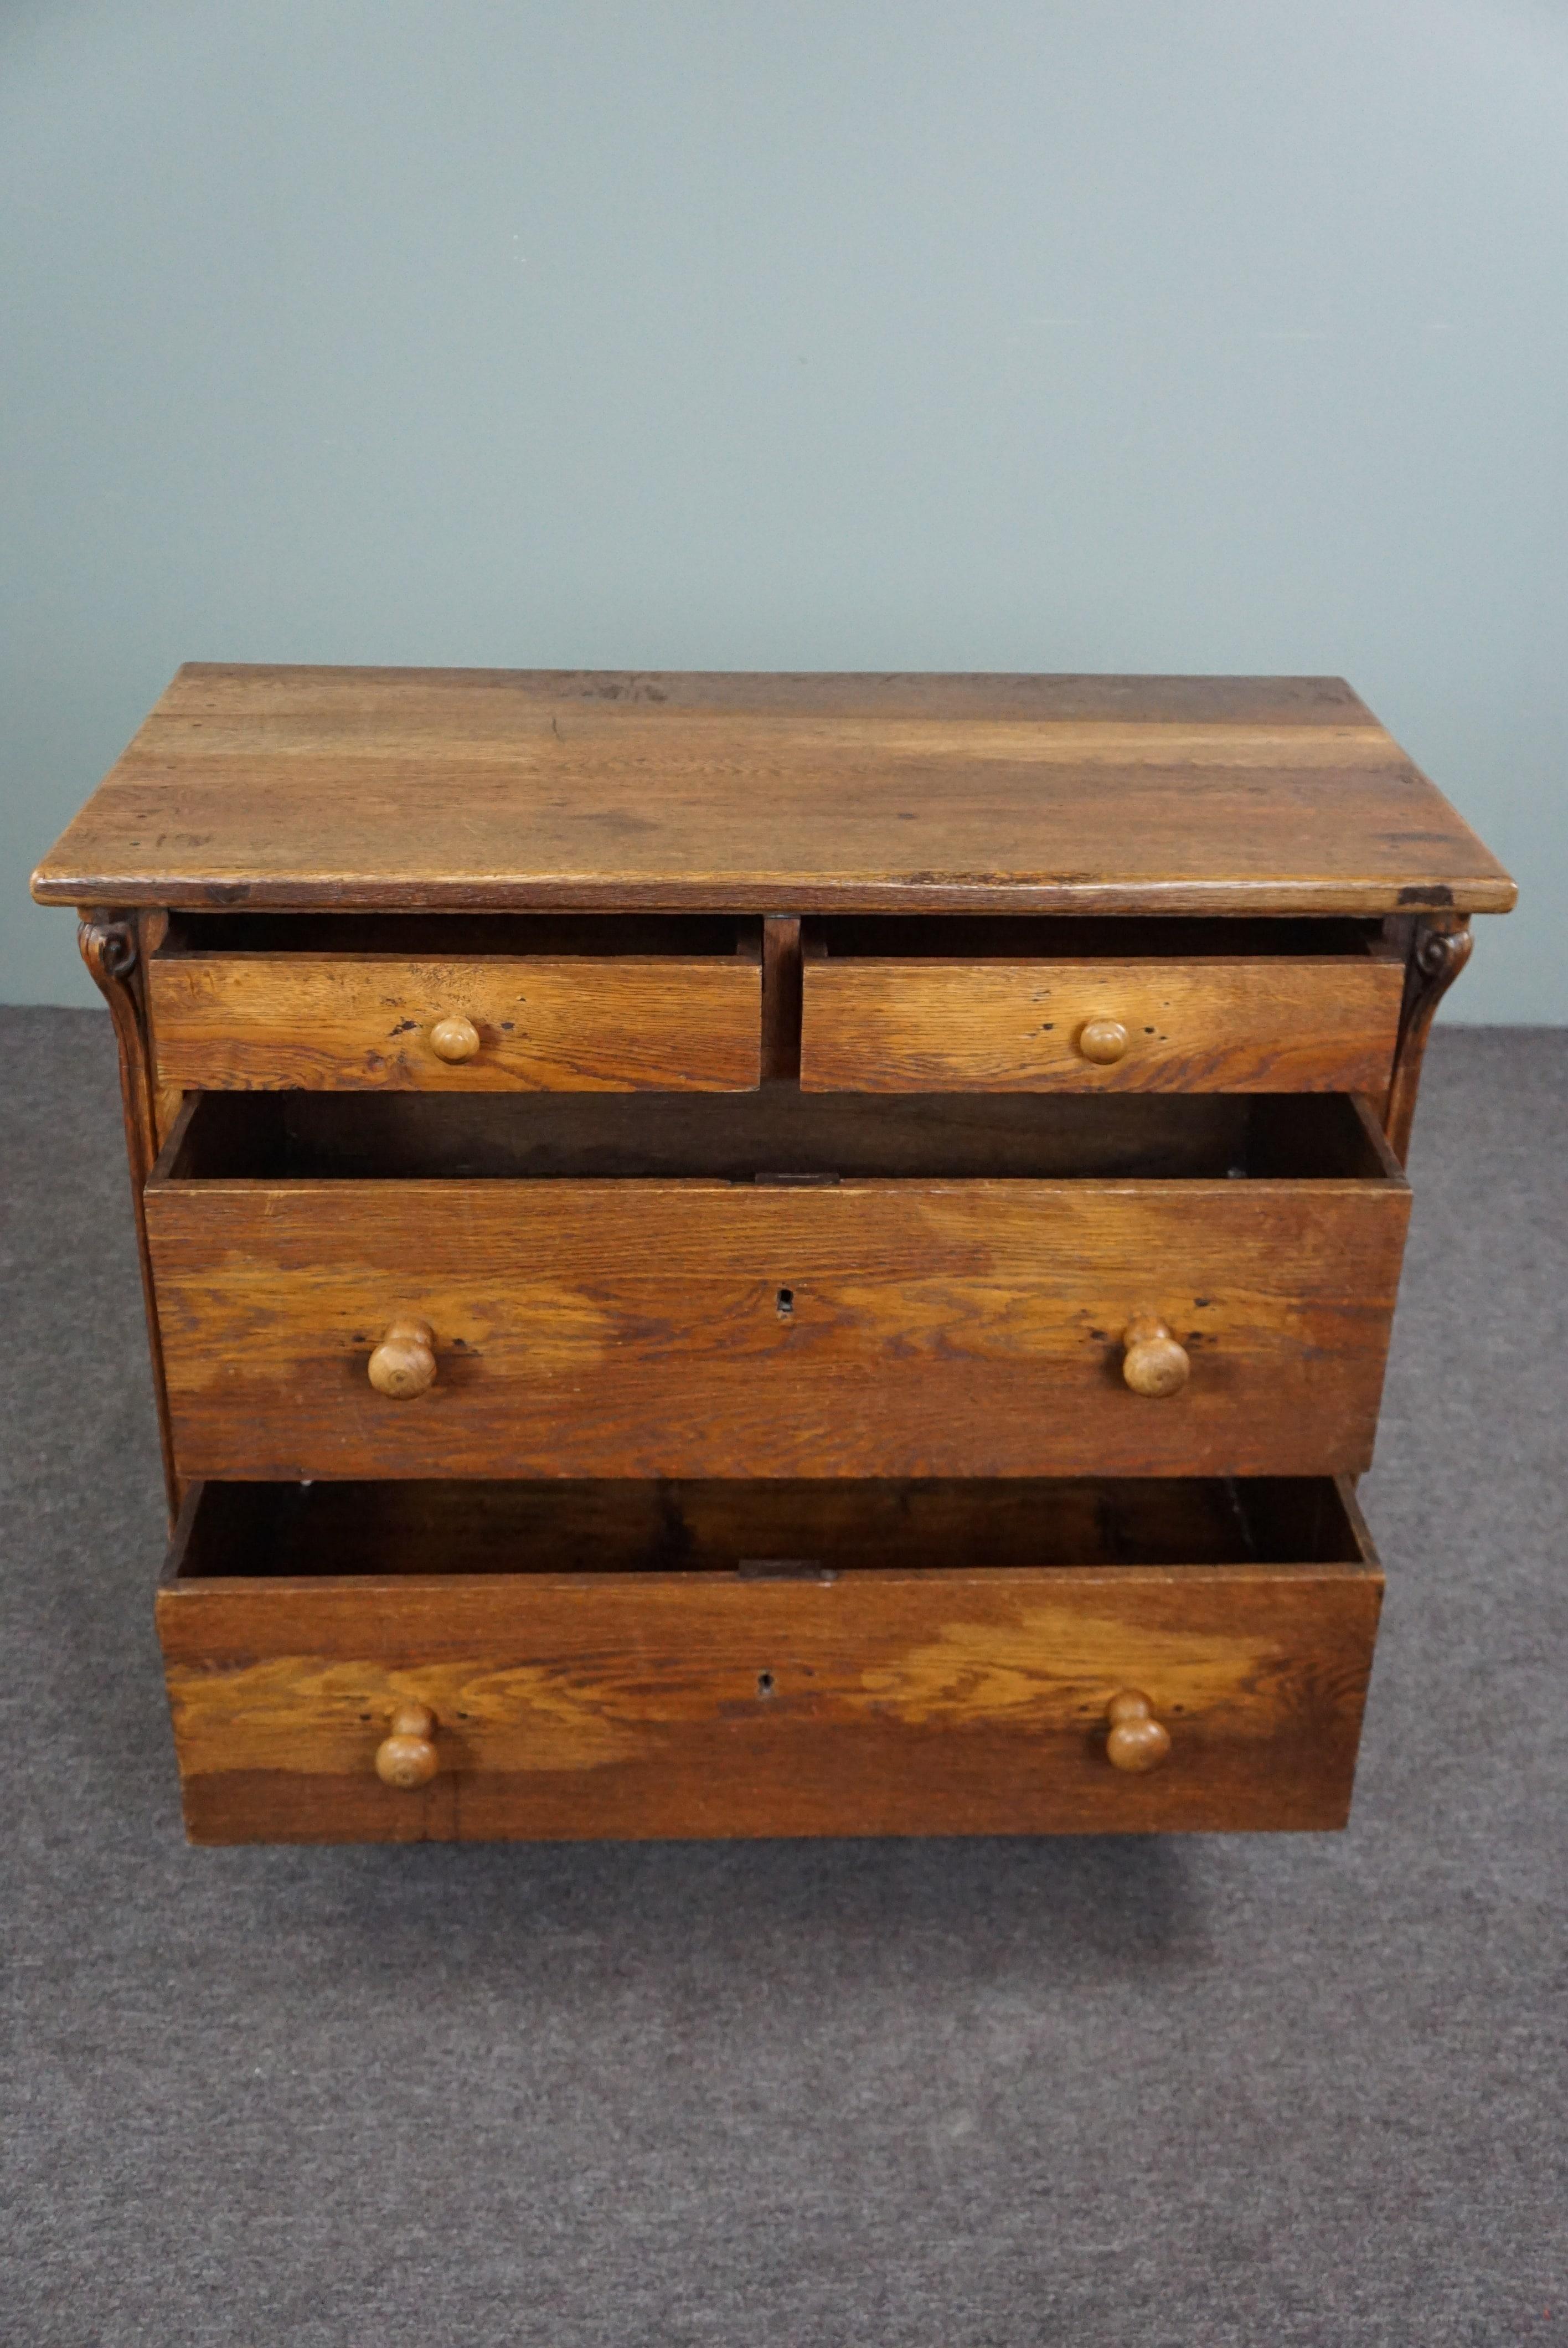 Wood Beautiful antique oak chest of drawers with 4 drawers and a striking appearance For Sale